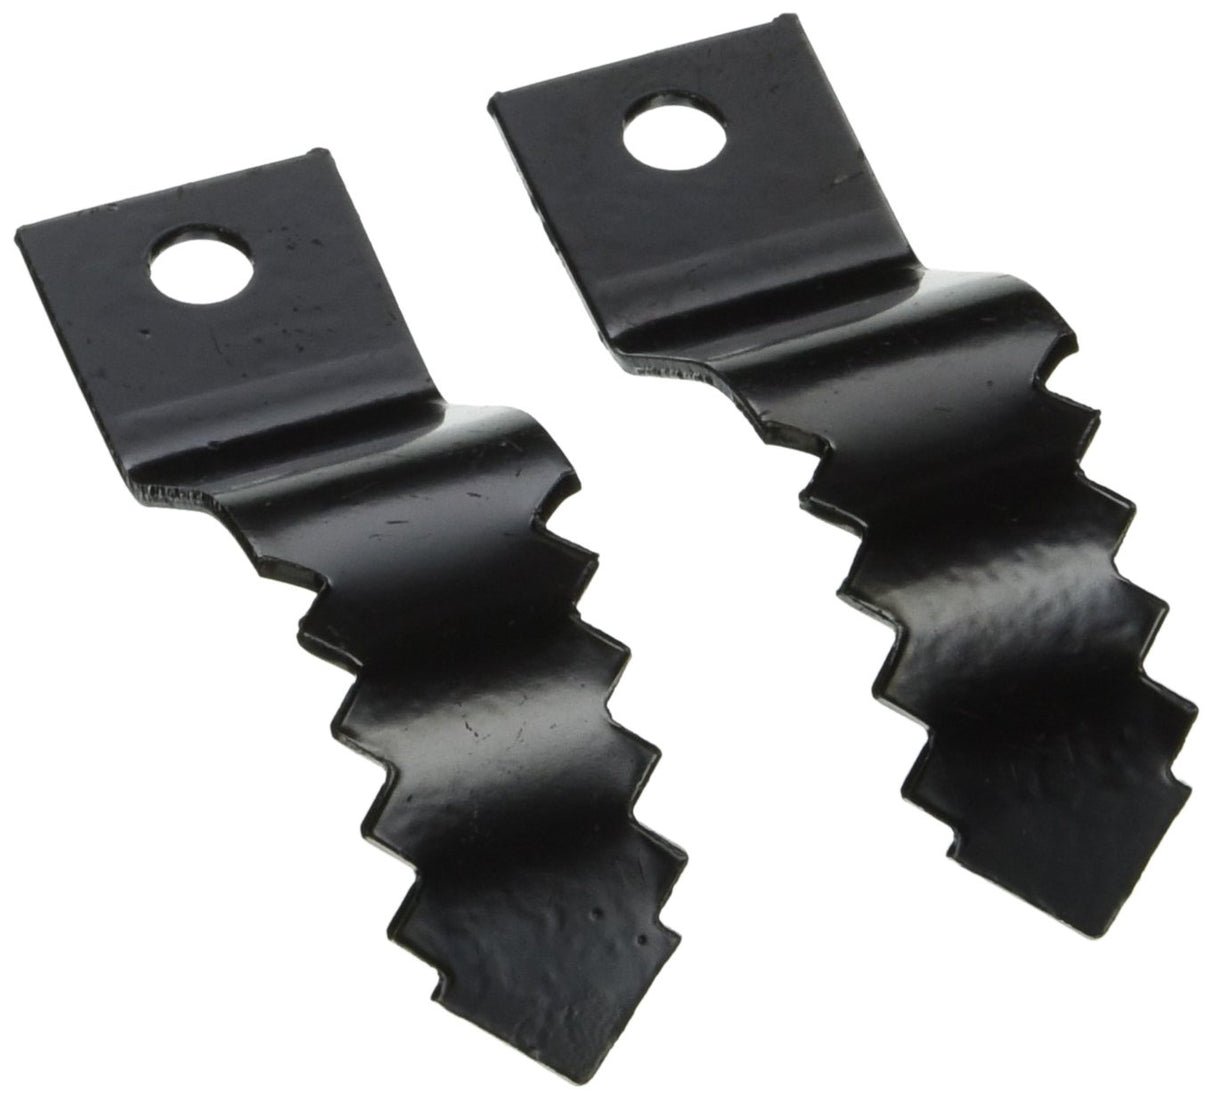 General Wire 2SCB 2" Side Cutter Blades 2 pc. - for 1/2", 5/8" and 3/4" Cables